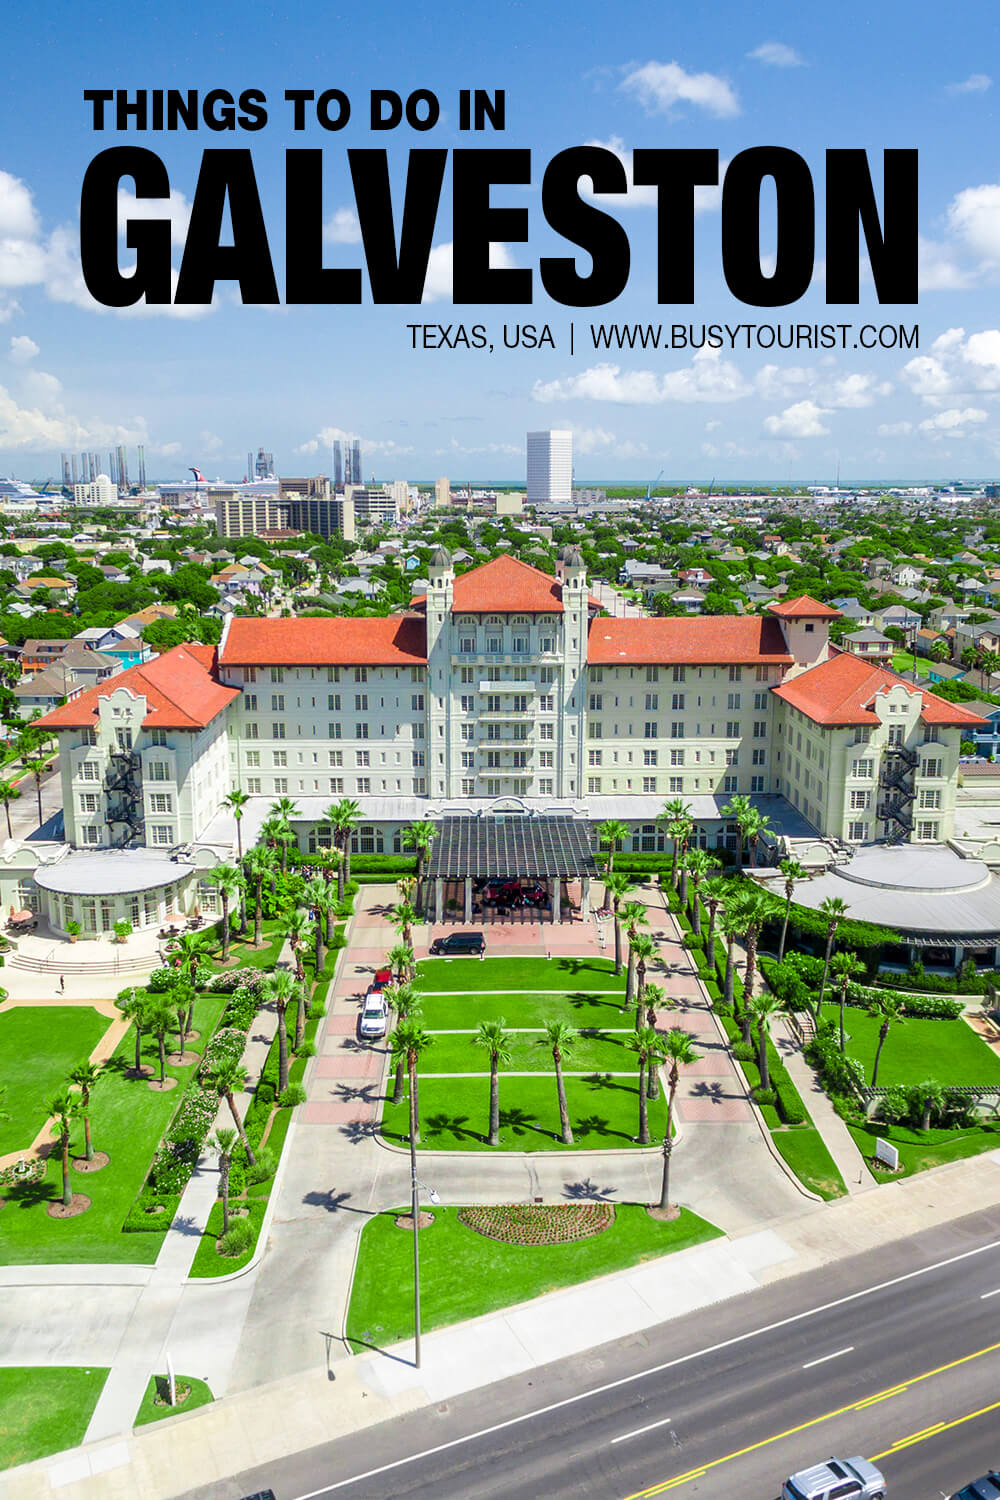 24 Best & Fun Things To Do In Galveston (TX) - Attractions & Activities